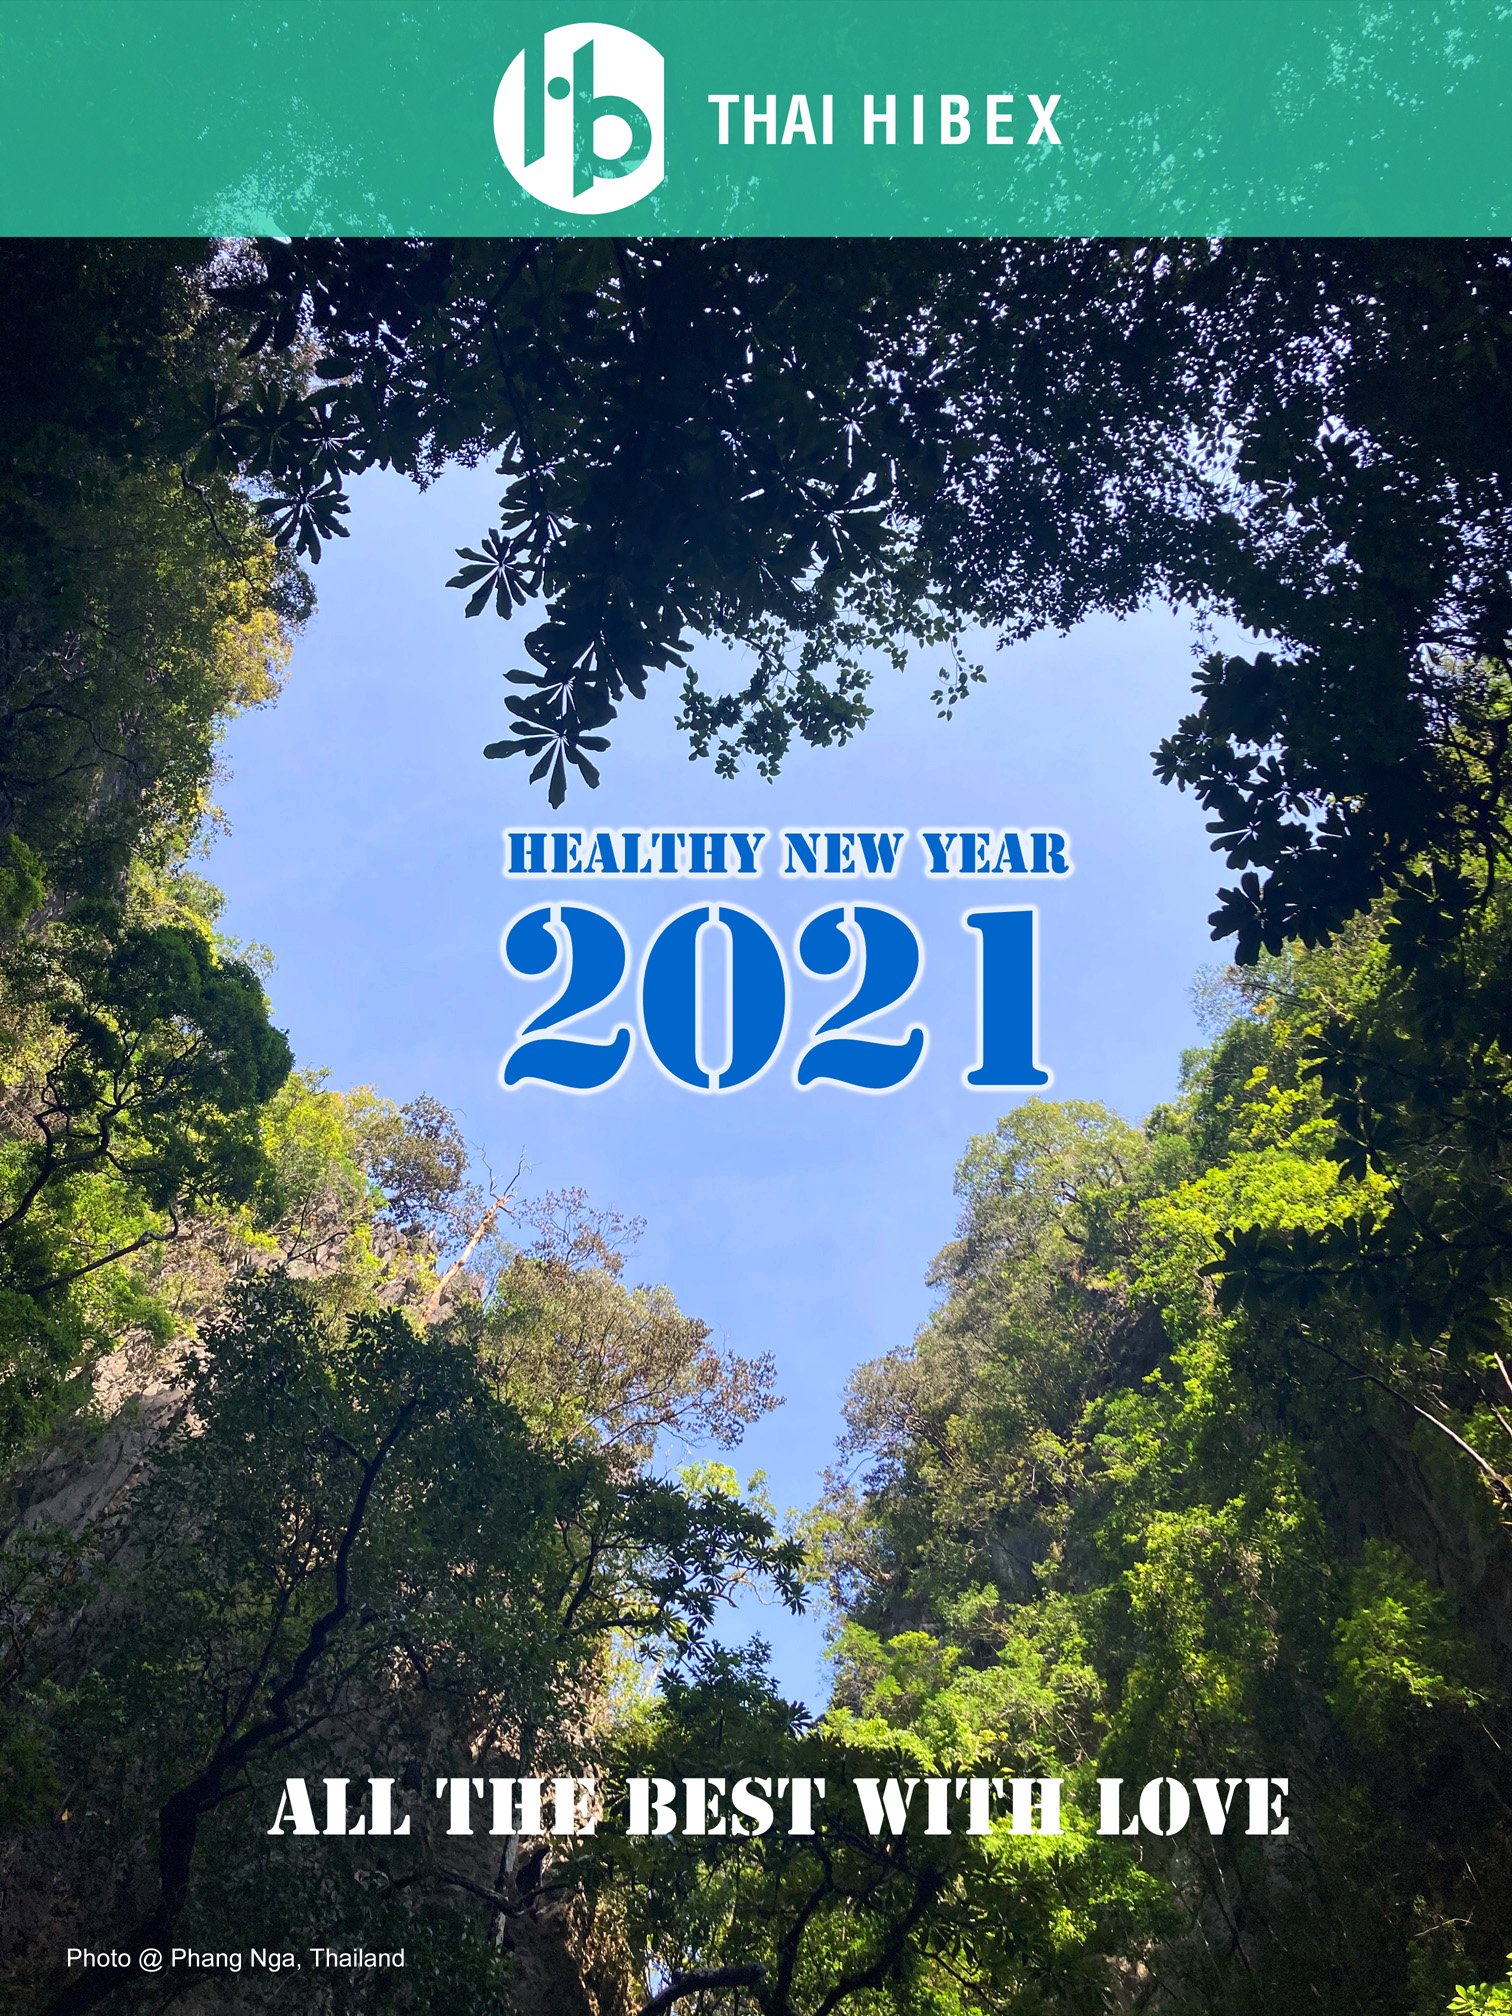 Wishing you a safe and healthy new year 2021